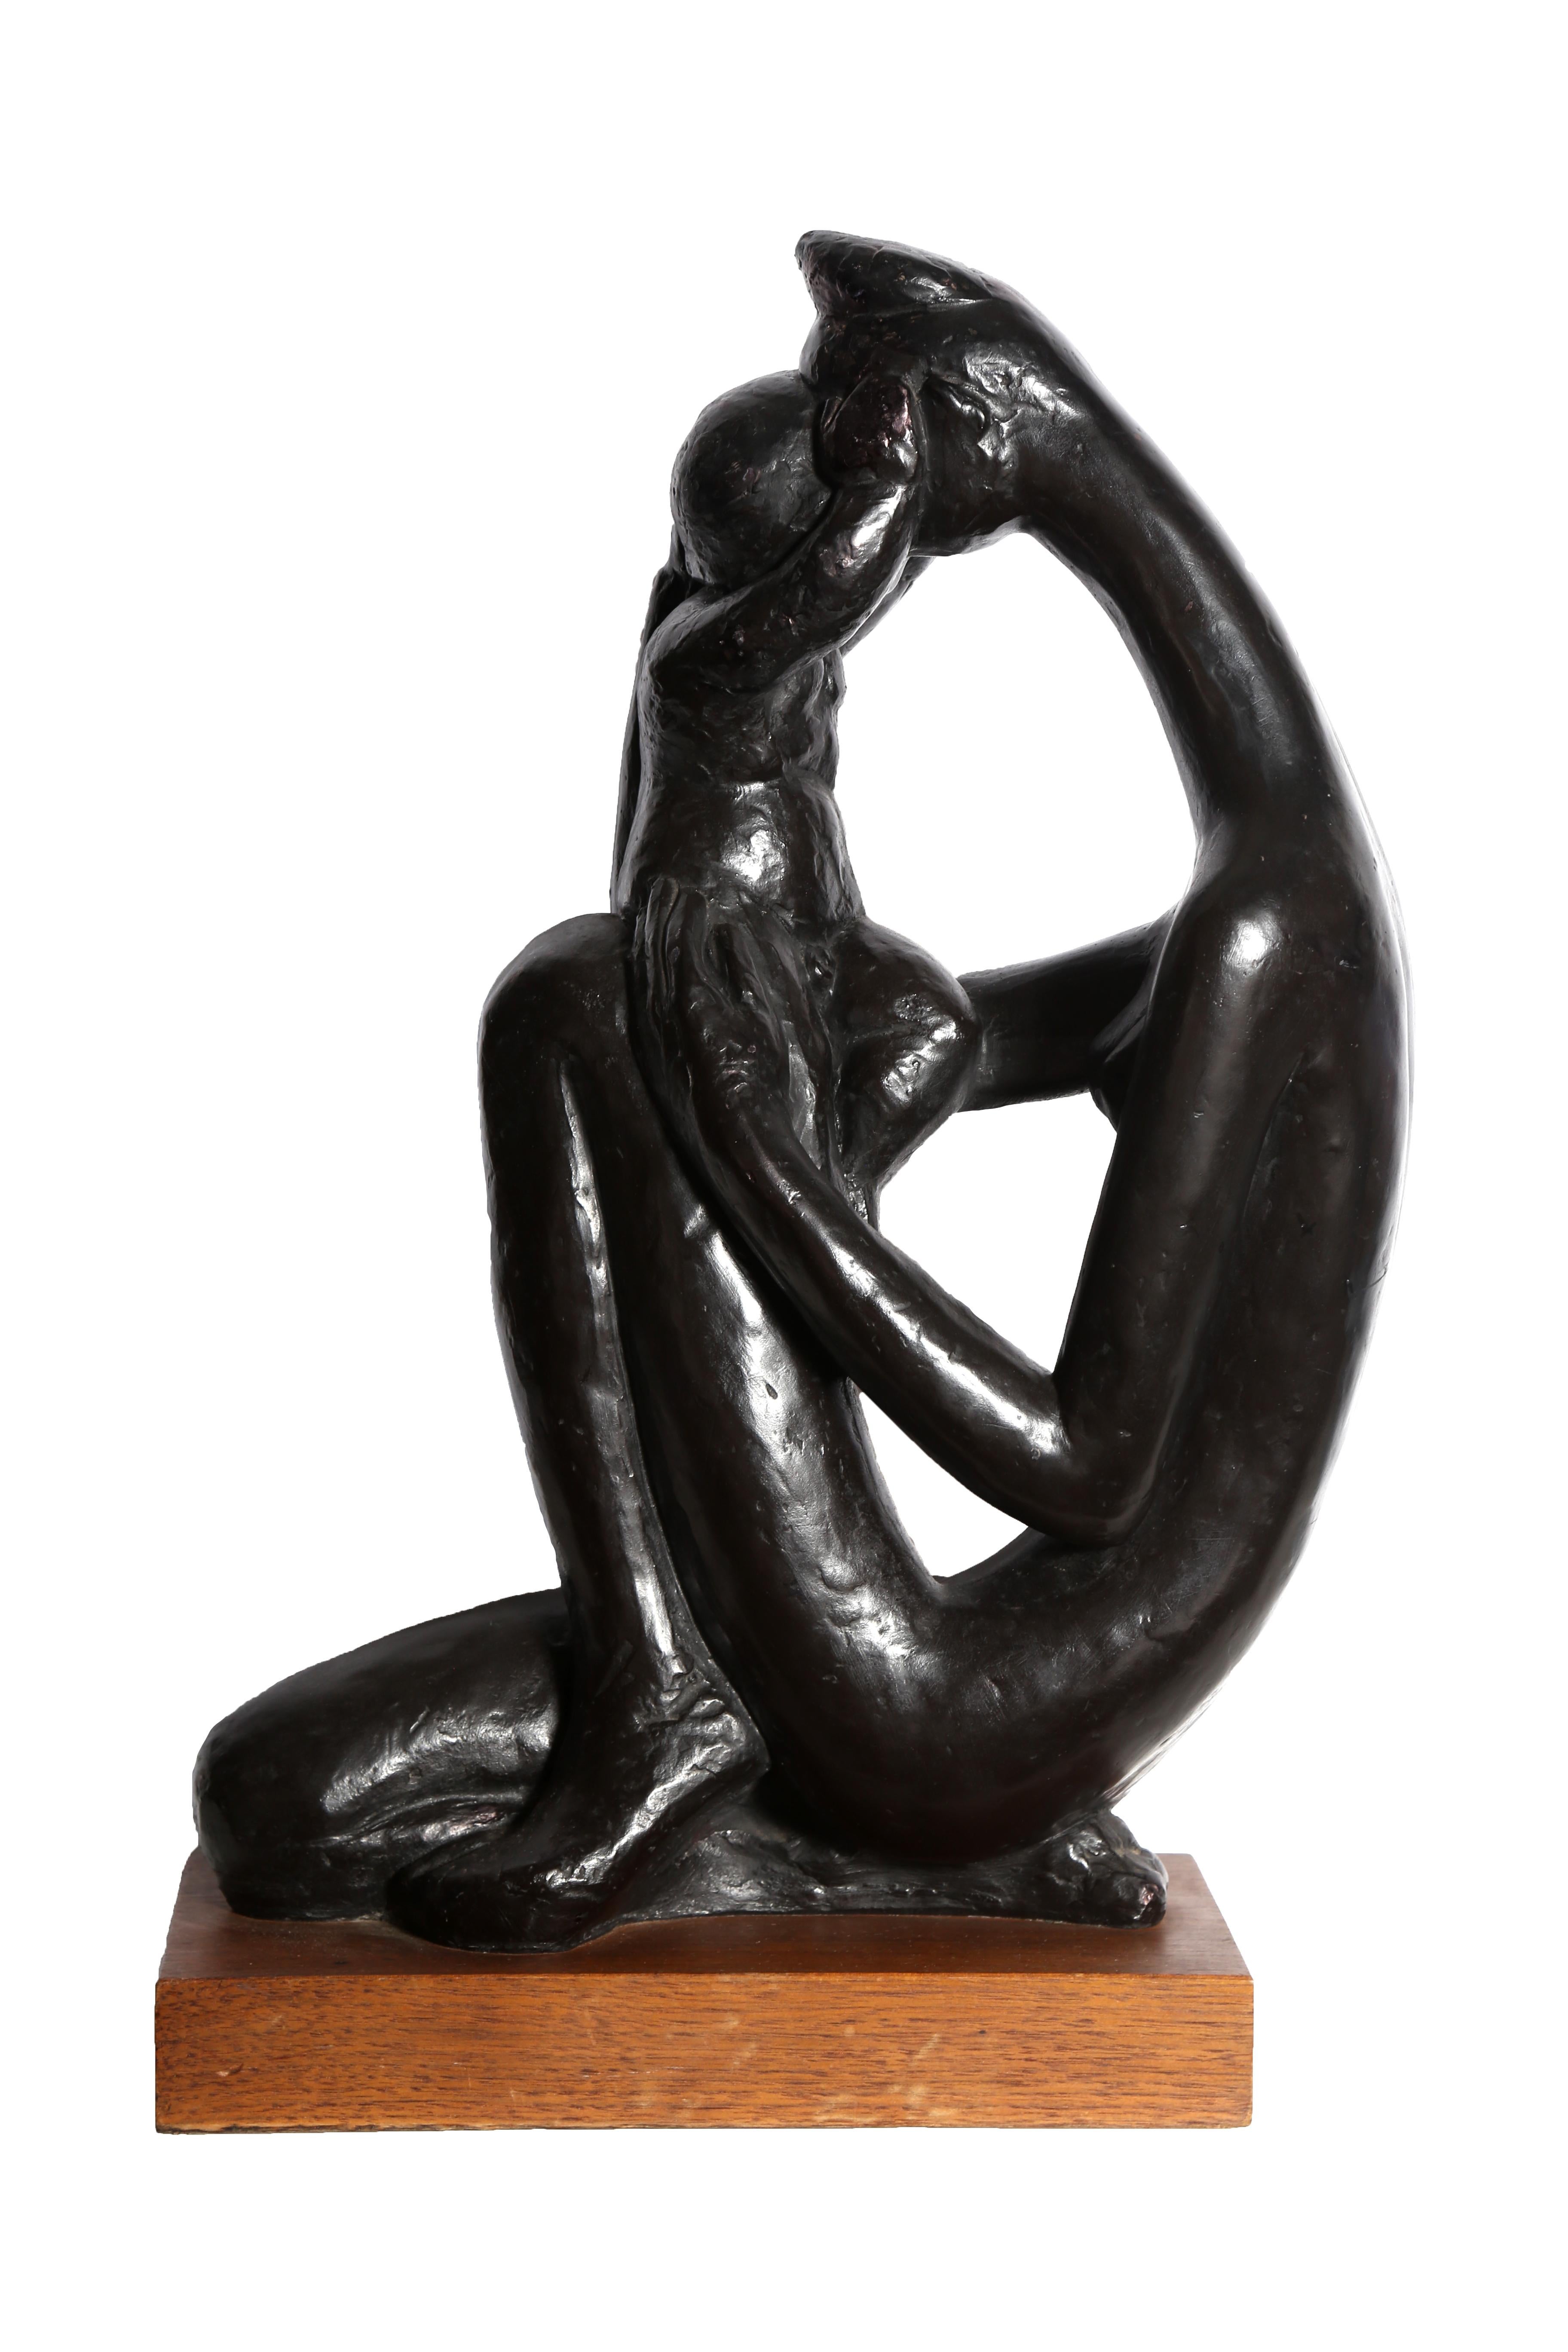 Mother and Child, Abstract Patinaed Resin Sculpture by Manuel Carbonell